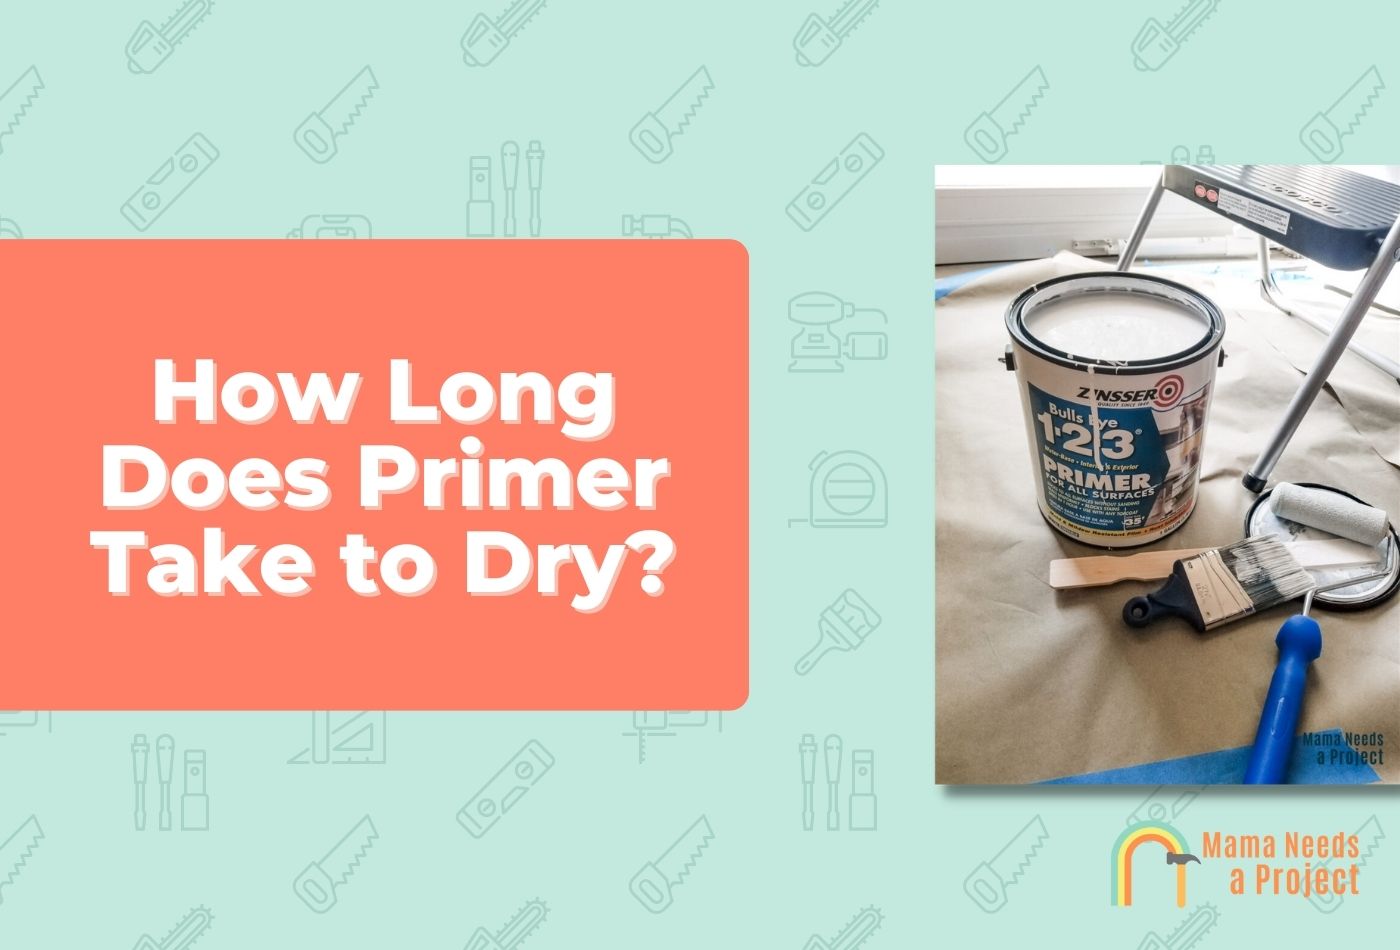 How Long Does Primer Take to Dry